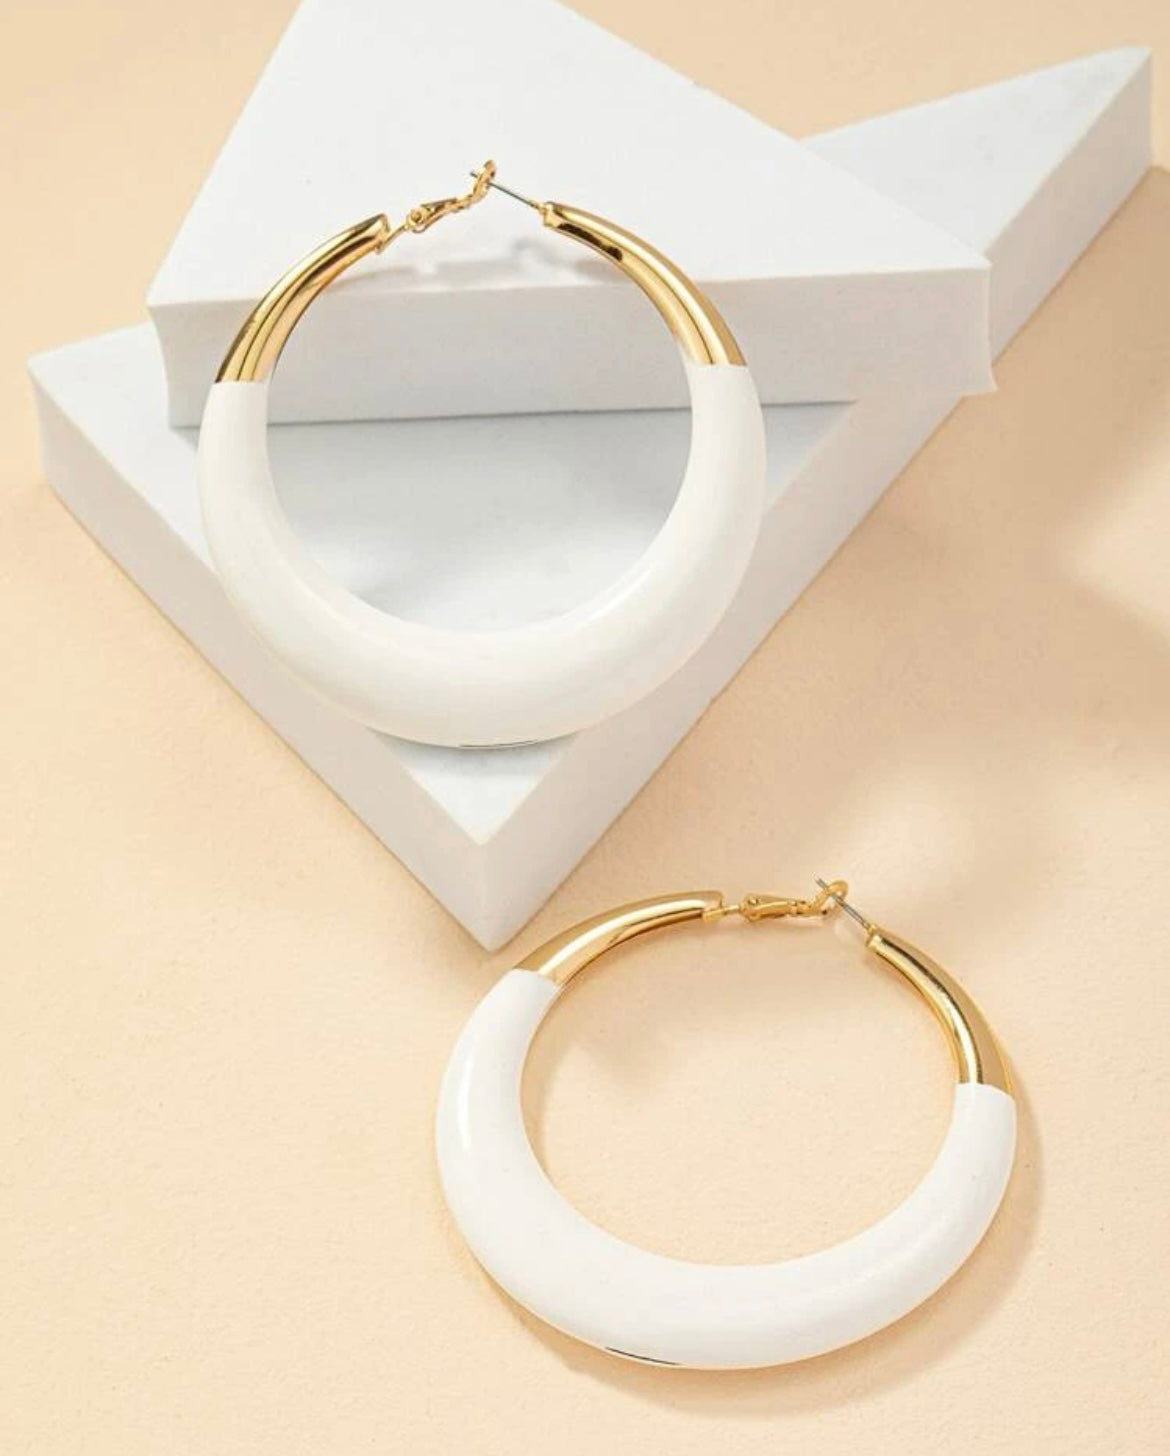 TWO TONE HOOP EARRINGS (WITH IMPERFECTIONS)